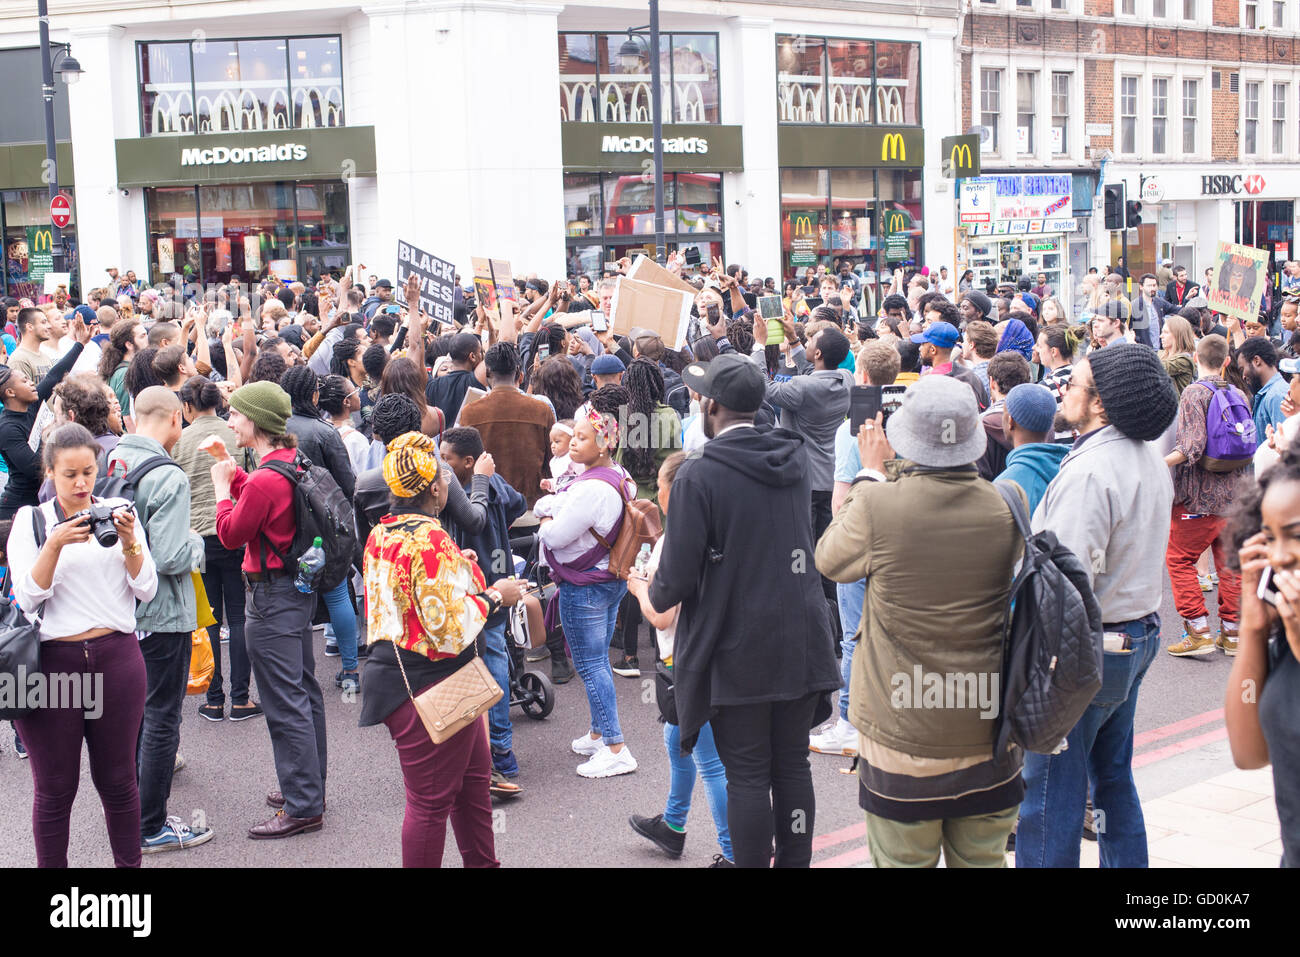 Brixton, London, UK. 9th July 2016. Hundreds of Black Lives Matter Supporters during a sit-in protest on Brixton High Street which brought London streets to standstill. The march is in response to the fatal shootings of Philando Castile in Minnesota and Alton Sterling in Louisiana. Credit:  Nicola Ferrari/Alamy Live News. Stock Photo